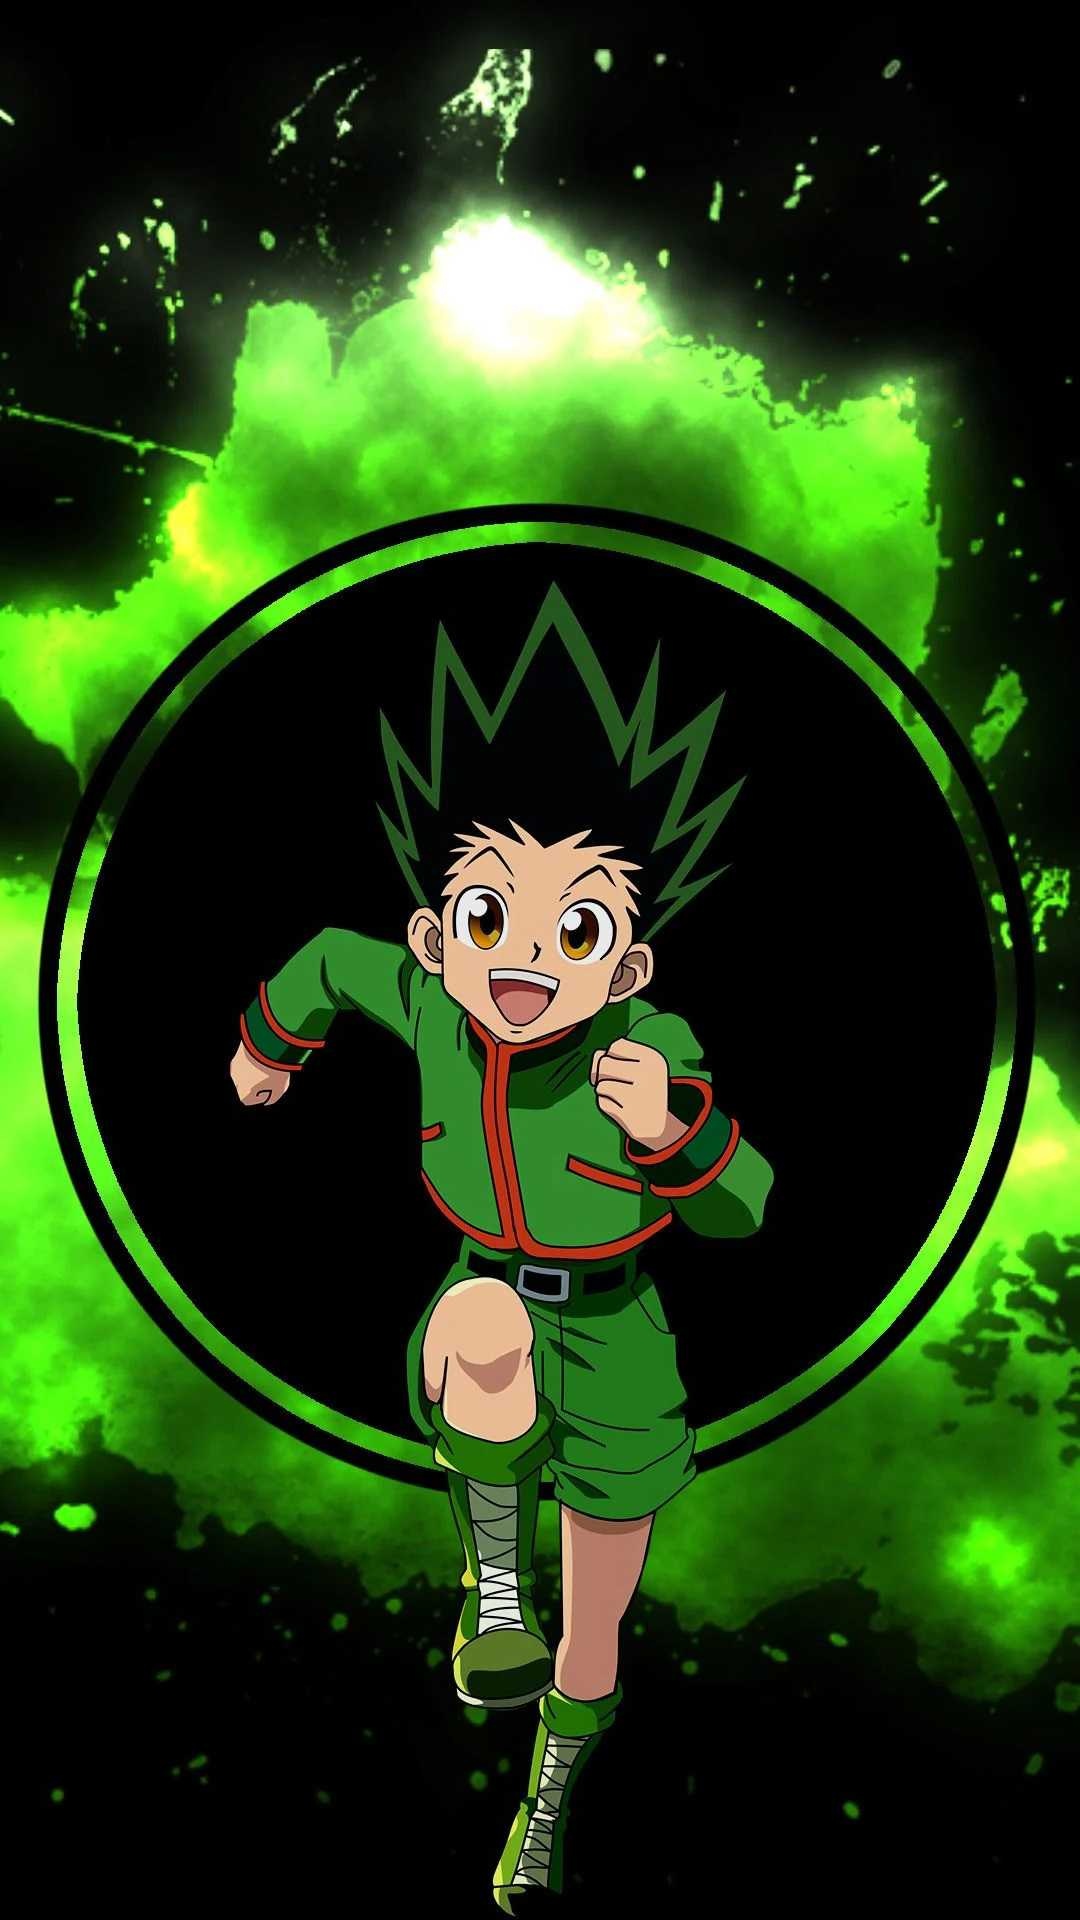 Gon Freecss: A green jacket with reddish edges, shorts, and laced boots, Japanese manga. 1080x1920 Full HD Wallpaper.